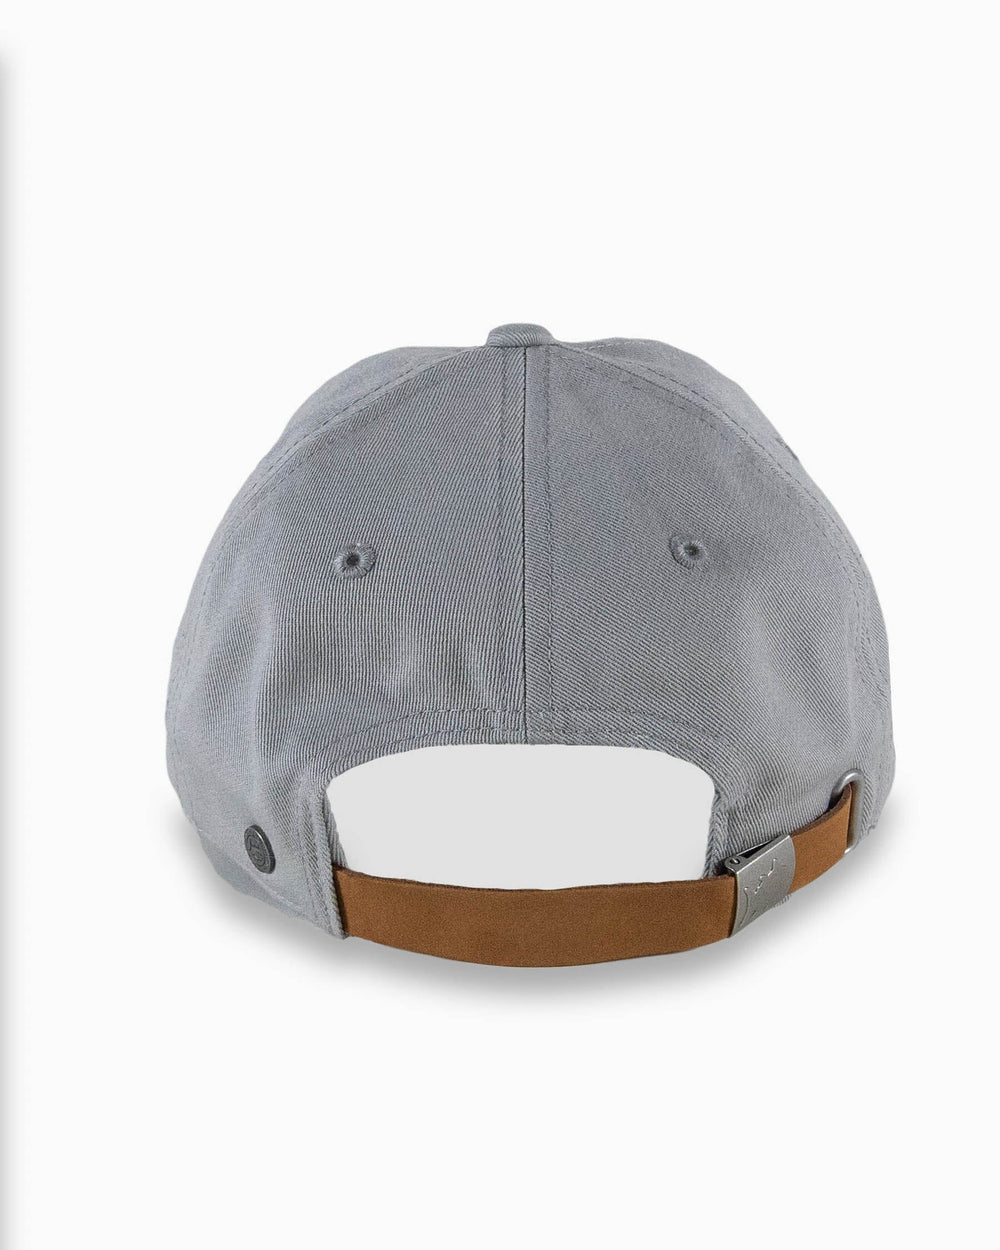 The back view of the Southern Tide Southern Tide Classic Hat by Southern Tide - Grey